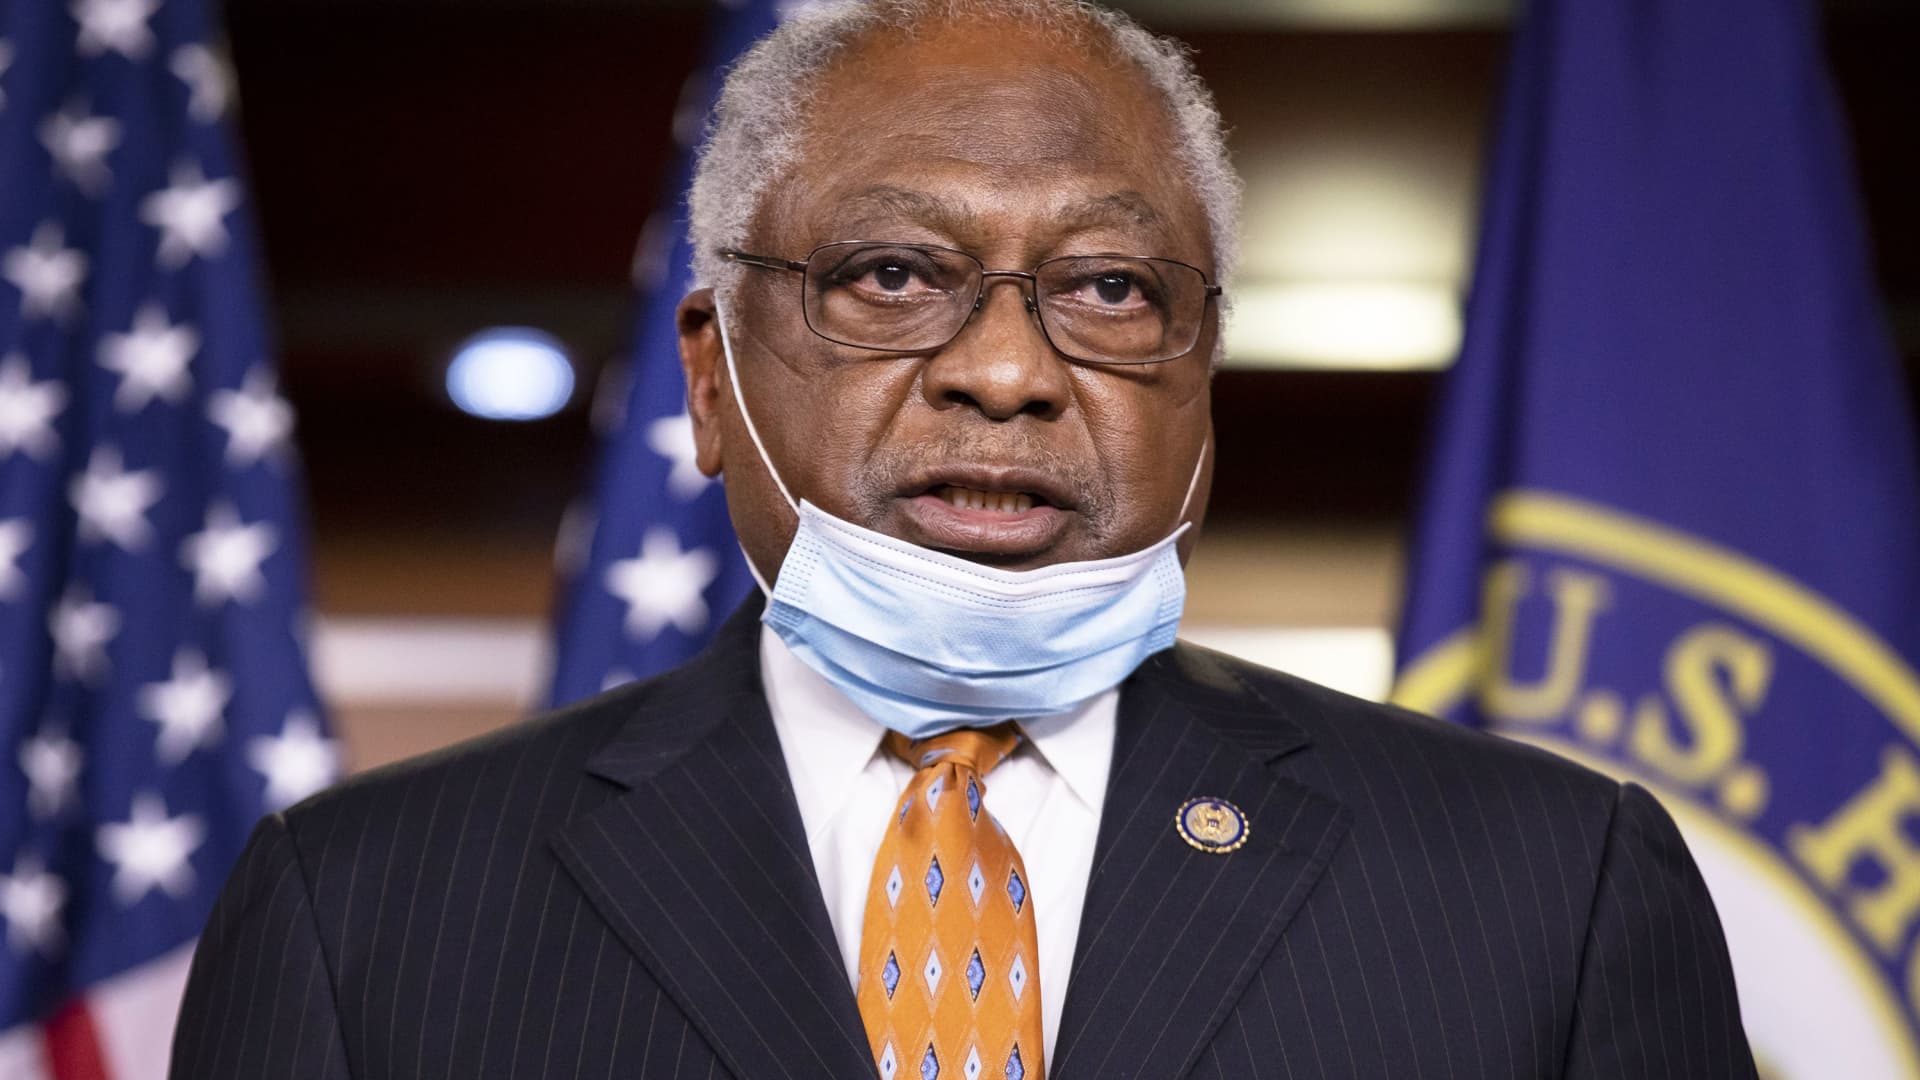 House Majority Whip James Clyburn, a Democrat from South Carolina, speaks during a news conference in Washington, D.C., on Wednesday, April 29, 2020.